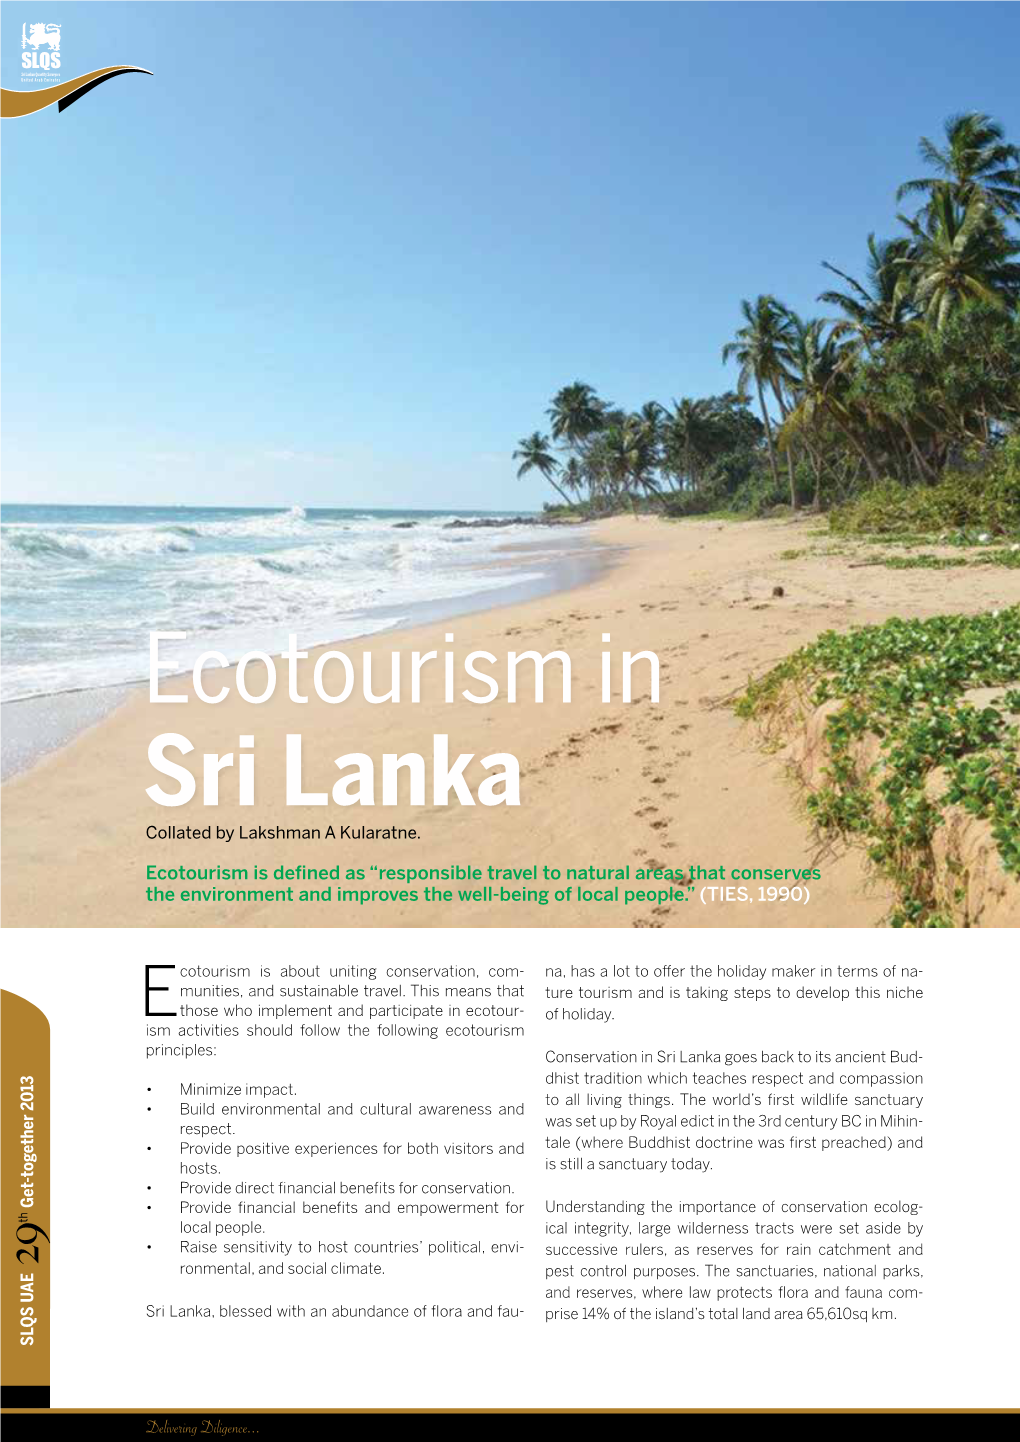 Ecotourism in Sri Lanka Collated by Lakshman a Kularatne